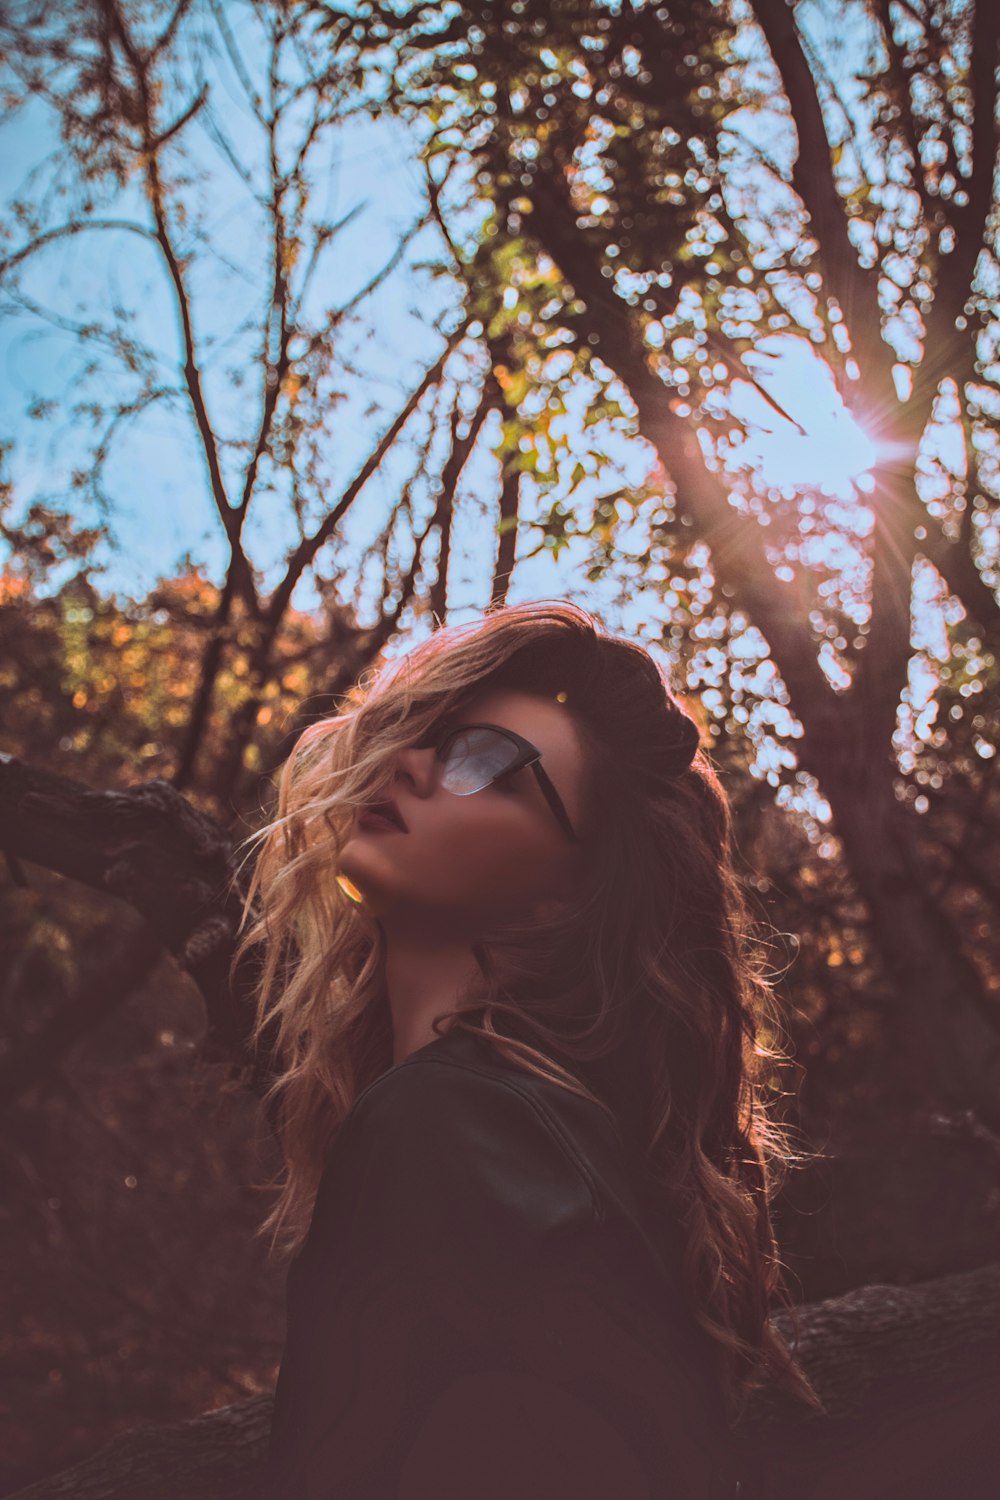 woman wearing sunglasses near trees during daytime